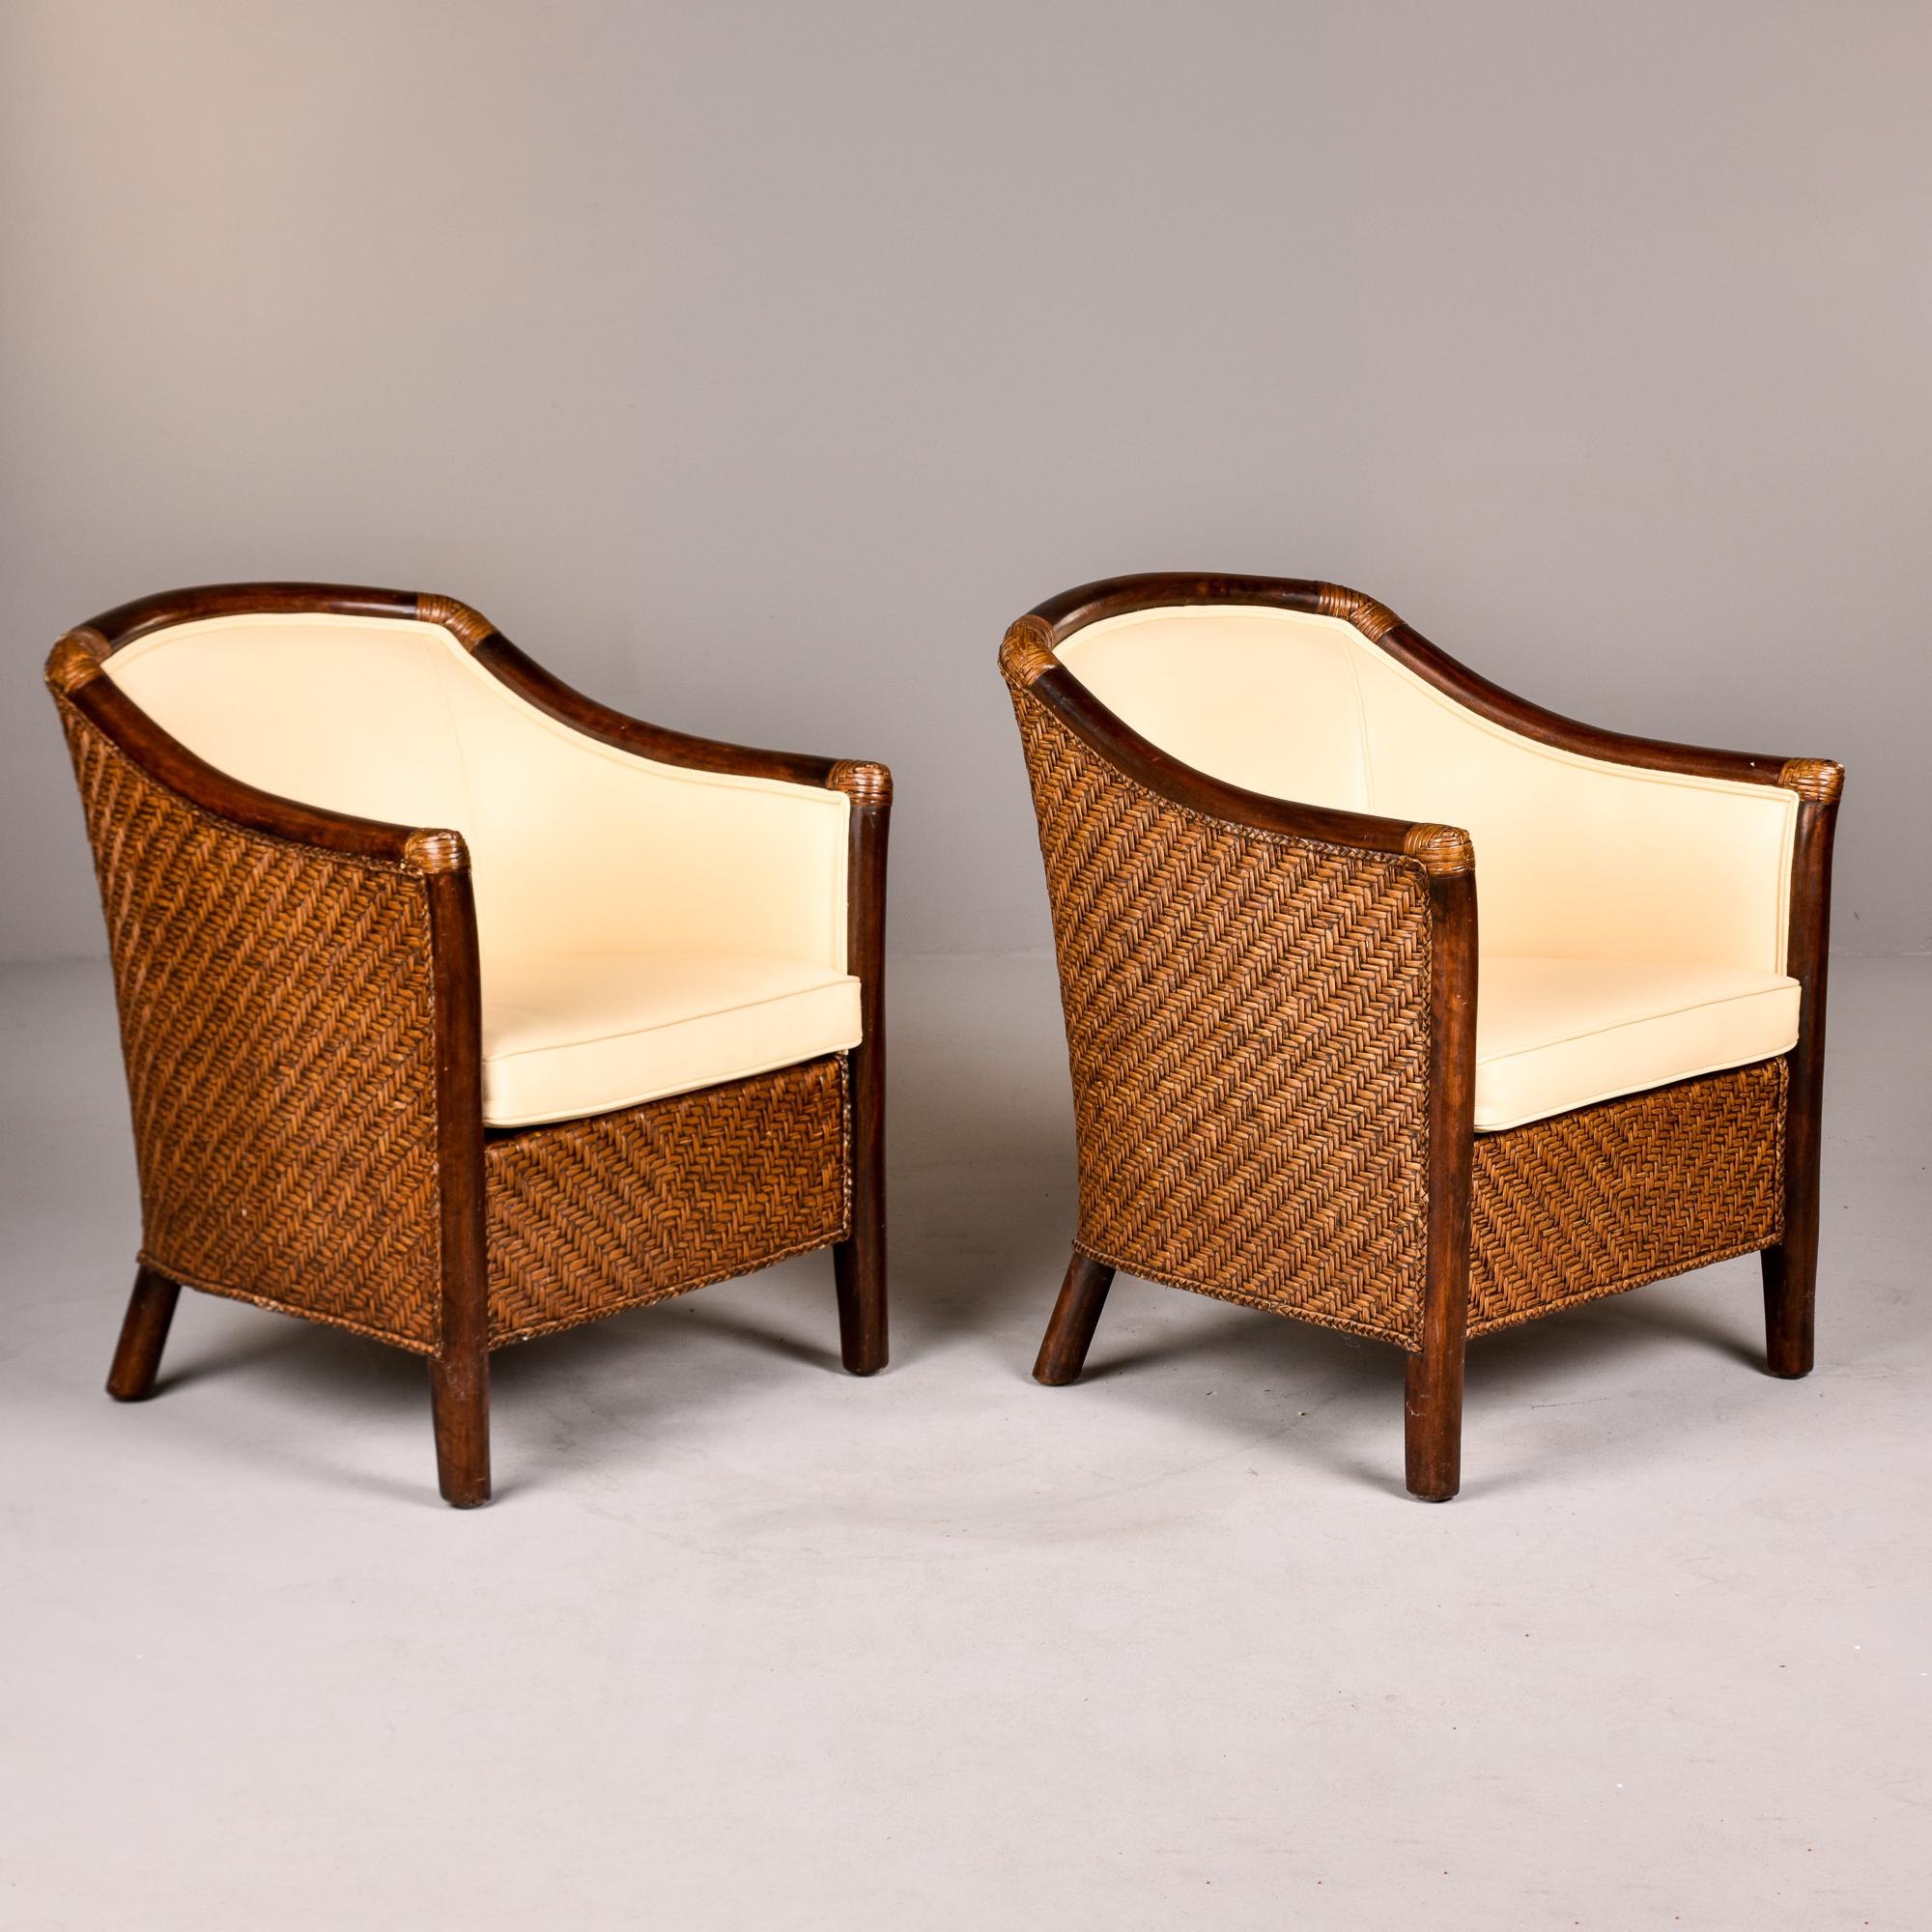 Found in Italy, this pair of wicker and bentwood frame club chairs date from the 1940s. We had them reupholstered in a creamy, ivory colored leather. Unknown maker. Coordinating sofa in same style / upholstery available at the time of this posting